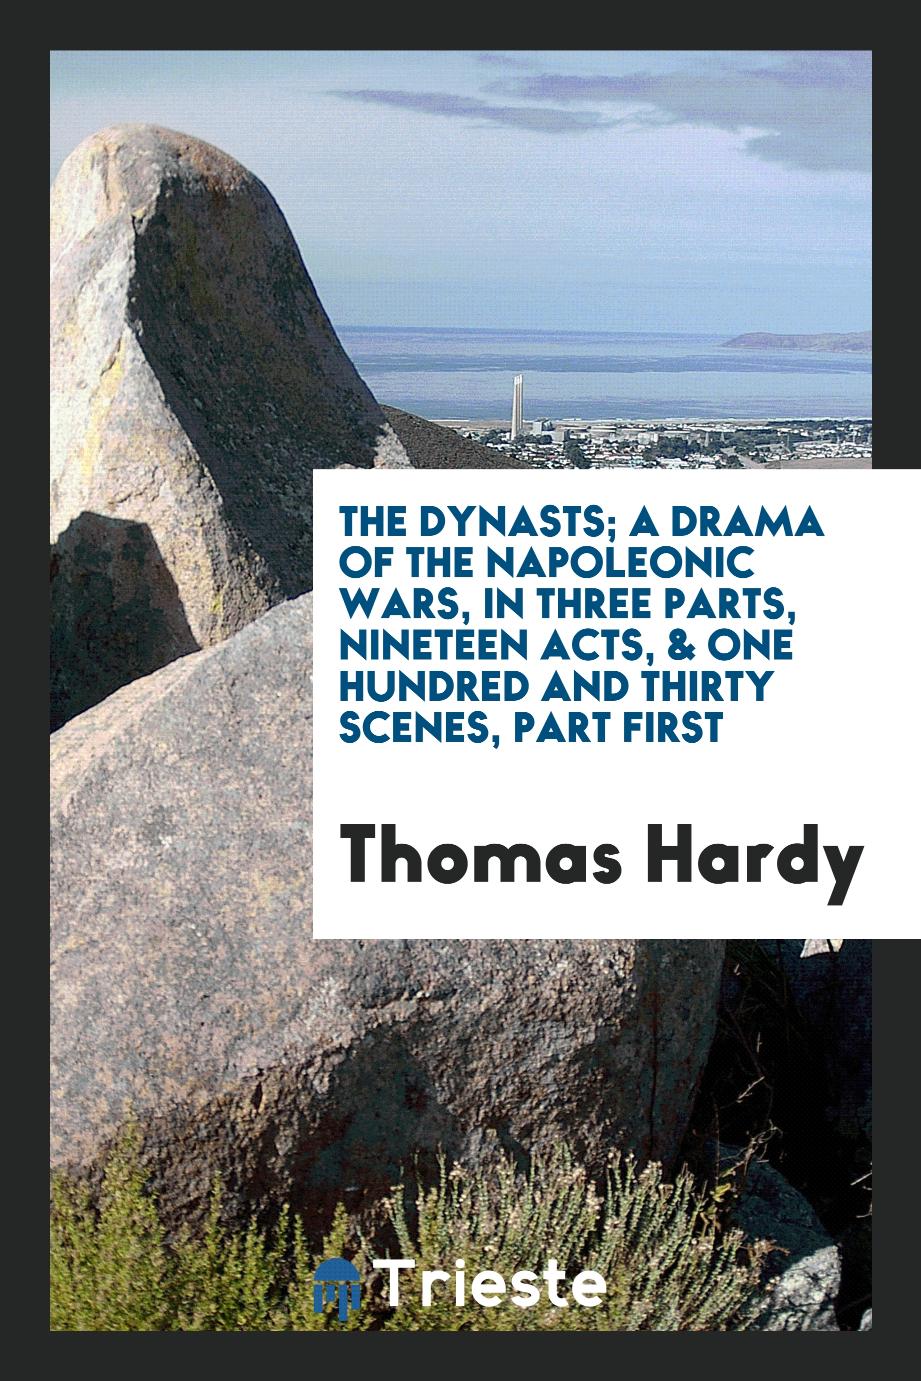 The dynasts; A drama of the Napoleonic wars, in three parts, nineteen acts, & one hundred and thirty scenes, part first